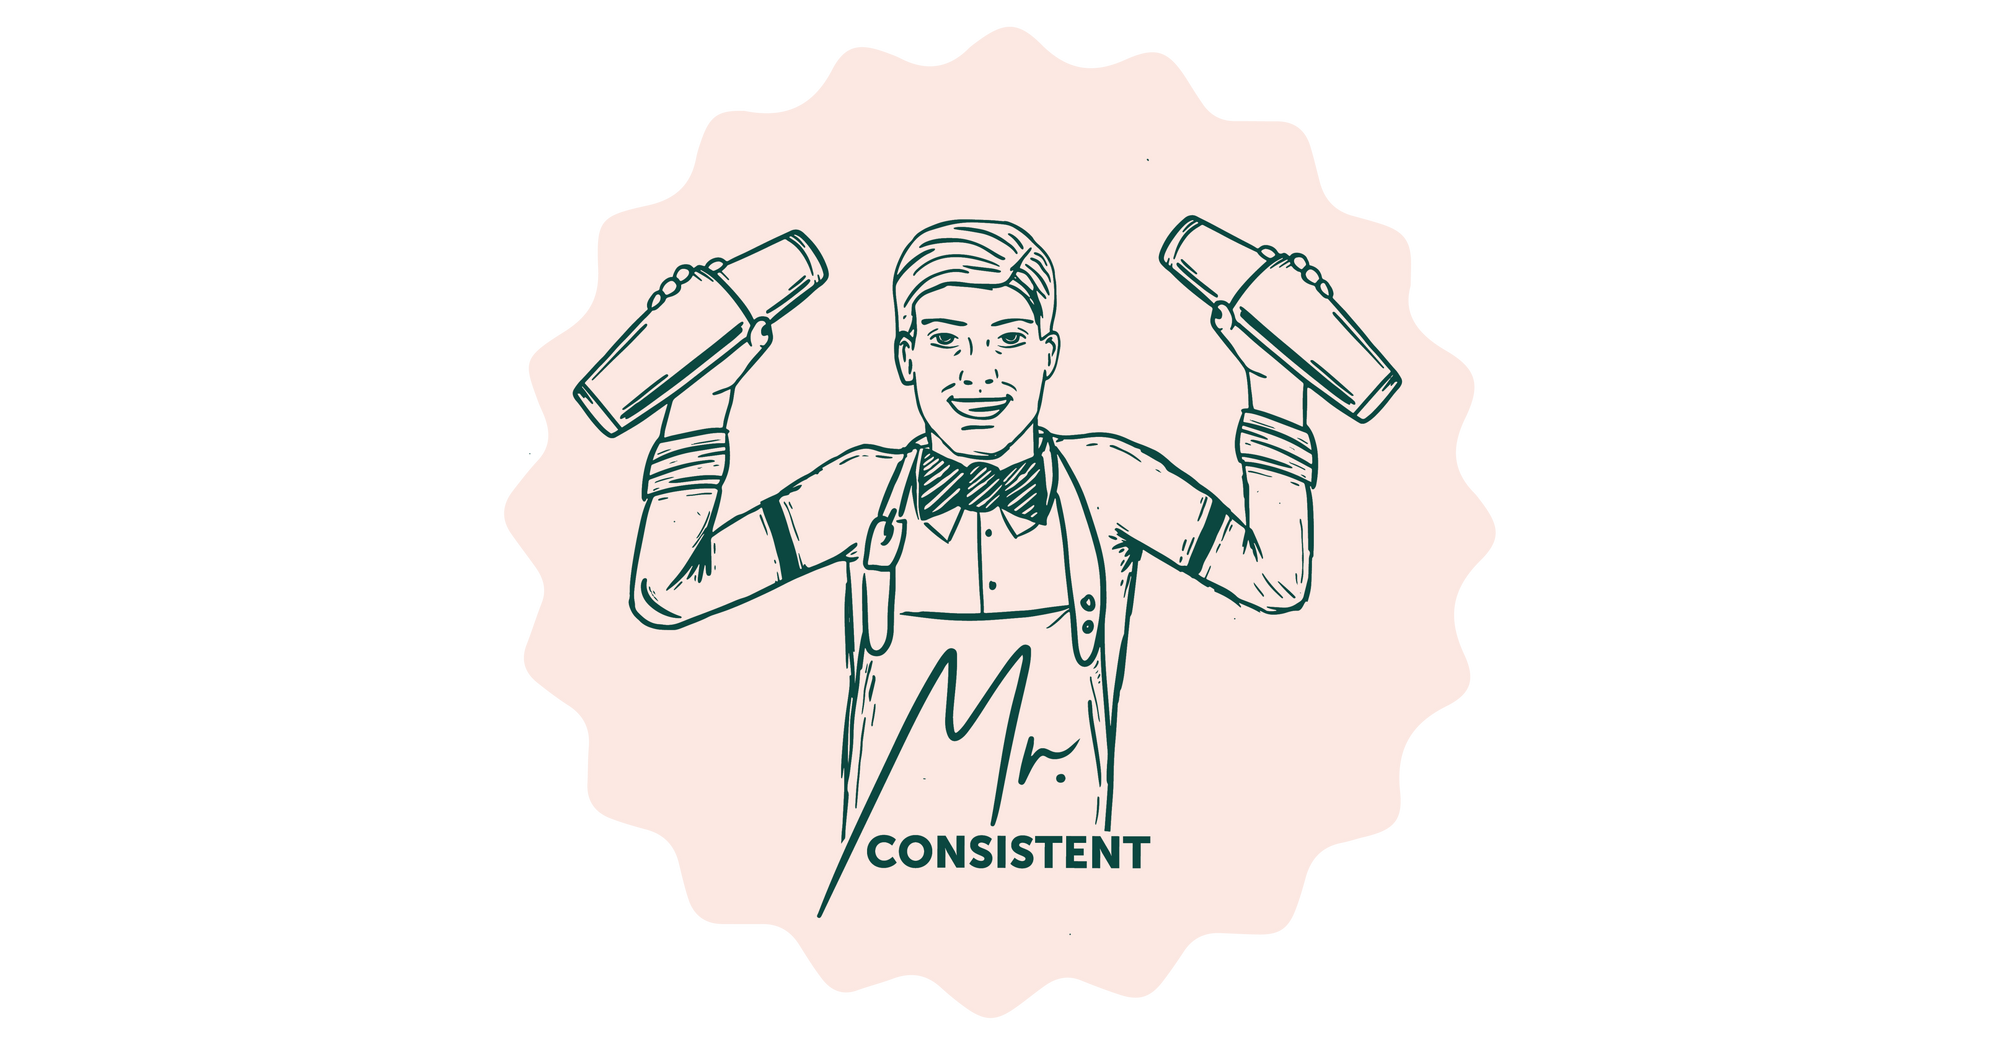 Premium, Handcrafted, Cocktail Mixers - Mr. Consistent